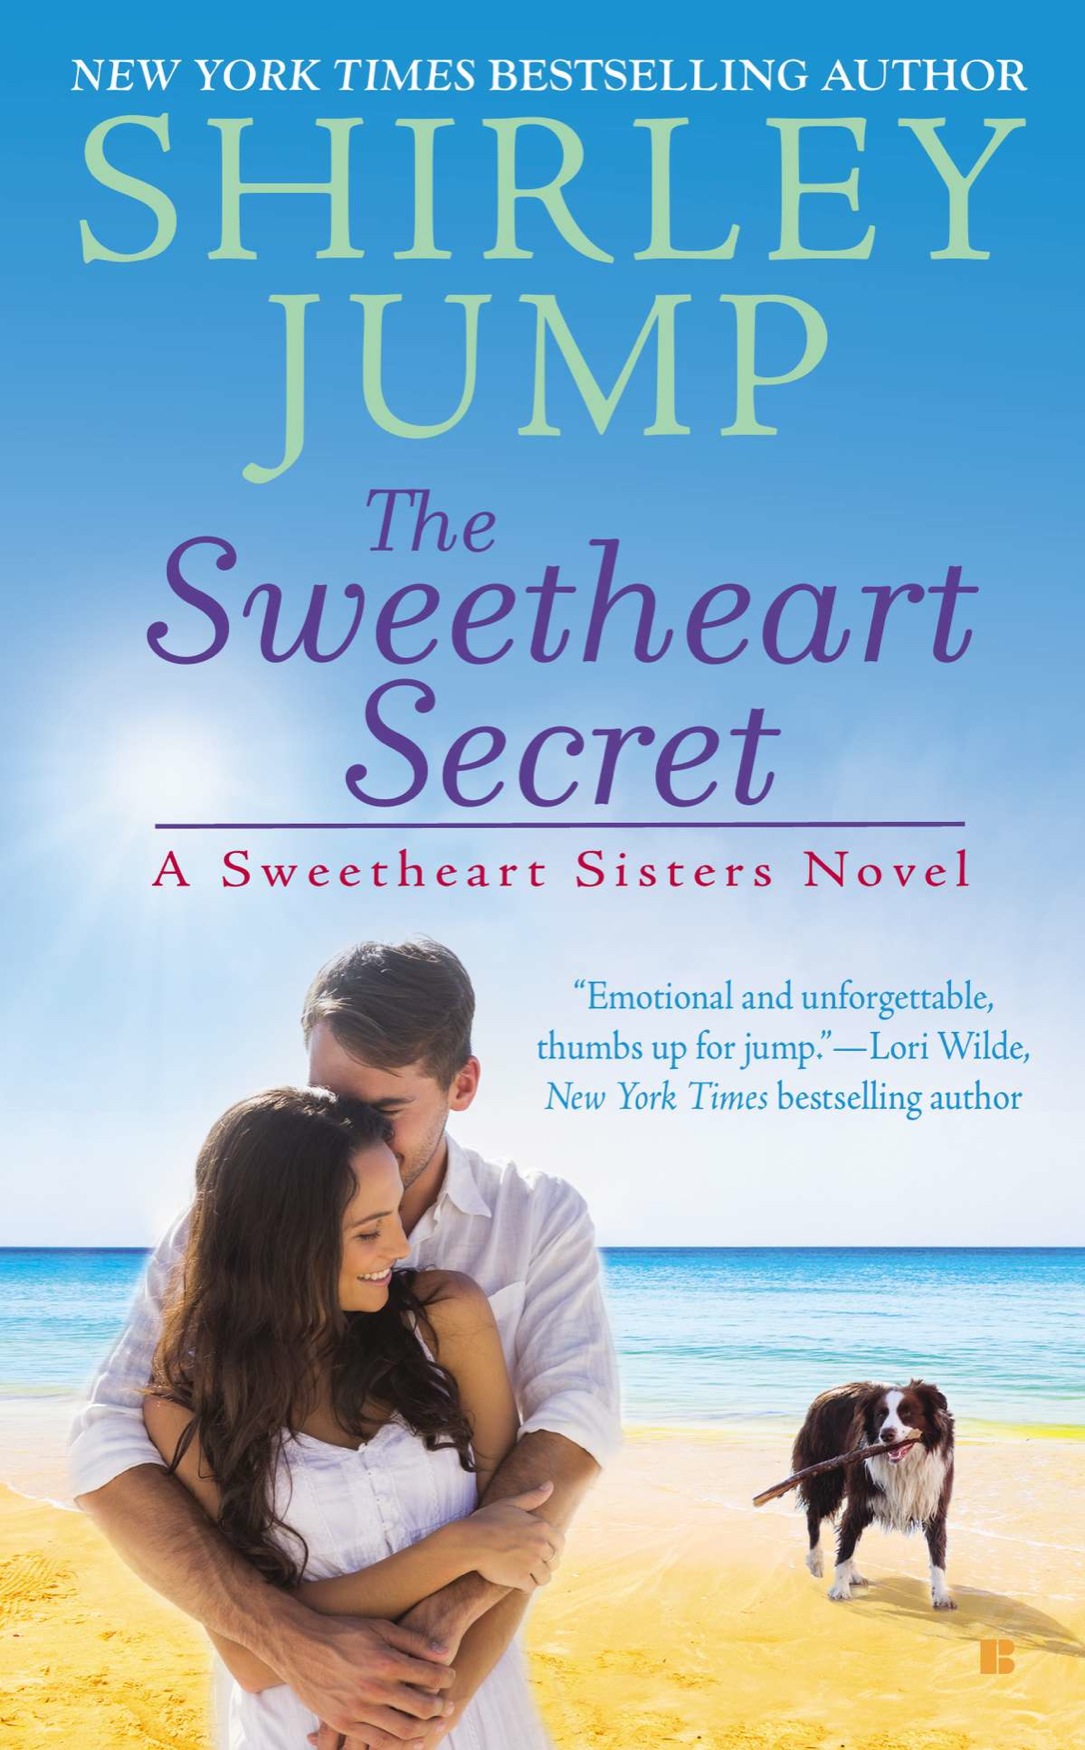 The Sweetheart Secret (2014) by Shirley Jump